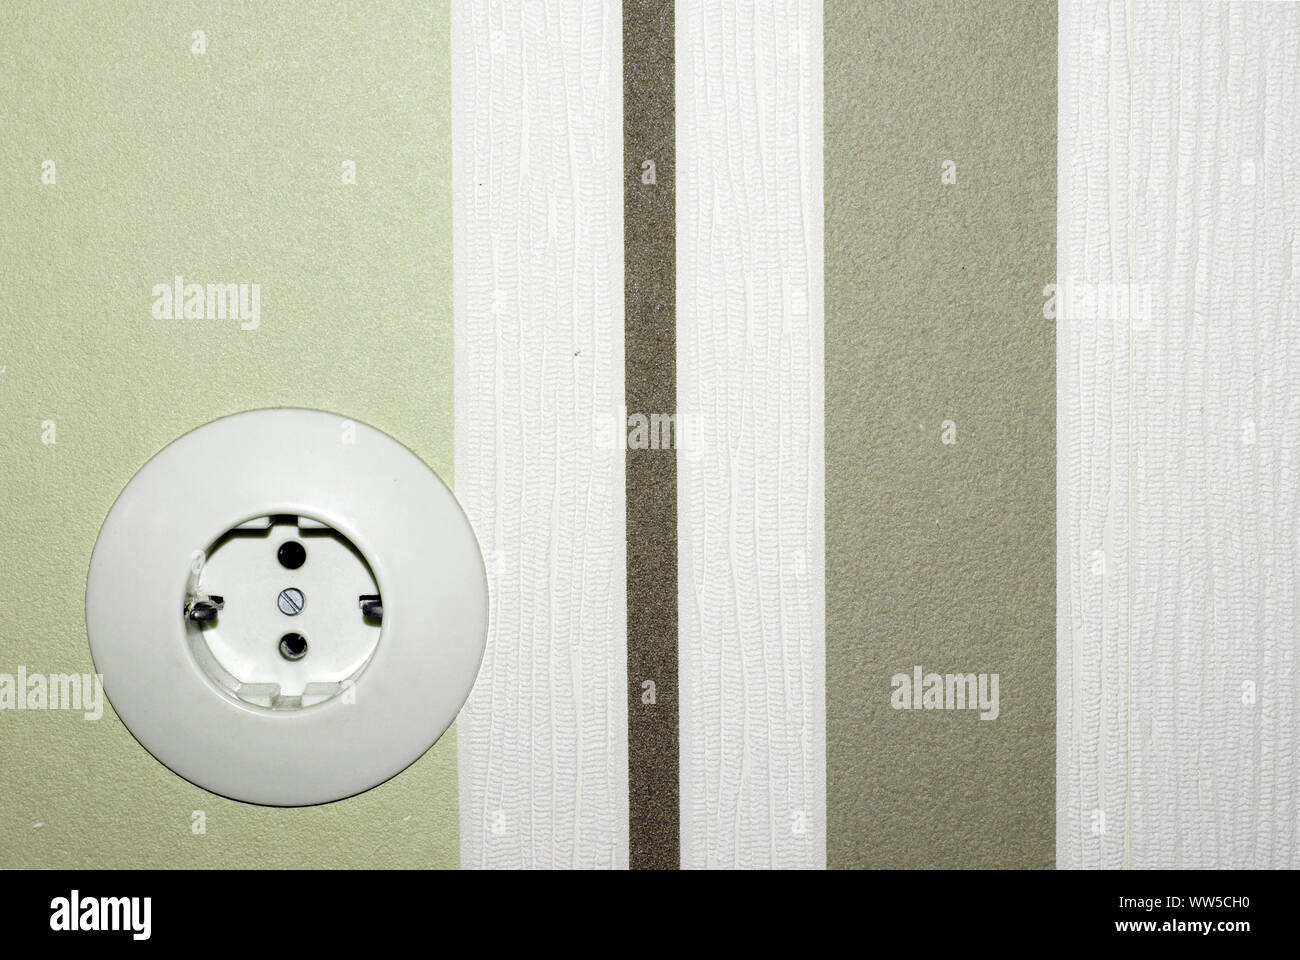 The front view of an old socket in front of a strikingly striped wallpaper, Stock Photo